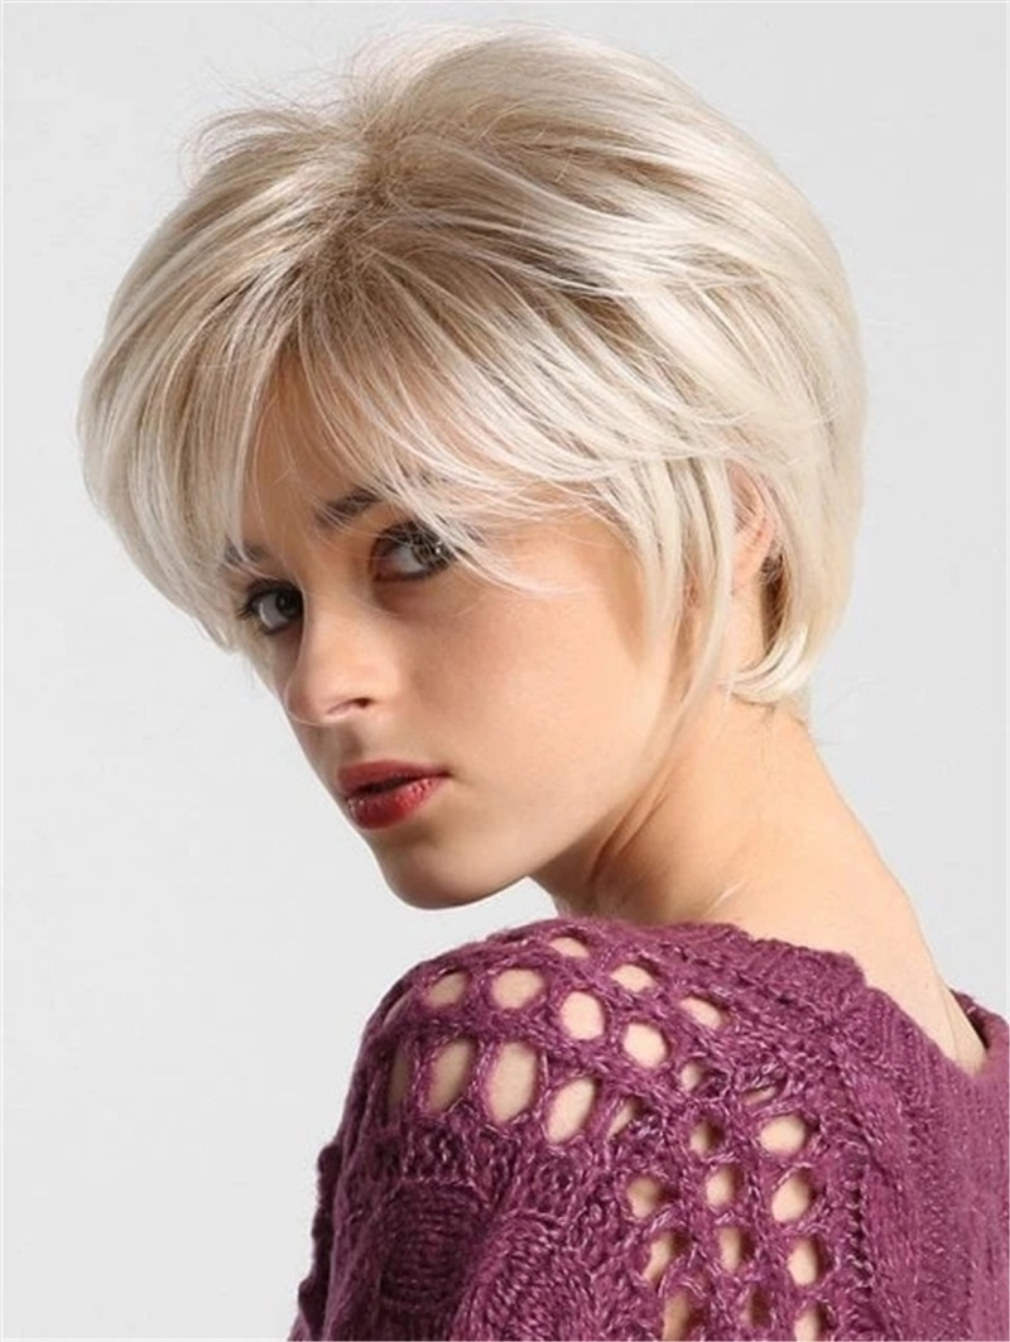 Hair Womens Blonde Wigs Short Hairstyle Soft Healthy Daily Wear Wig Short Synthetic Wigs for Women Mommy Gifts Wigs